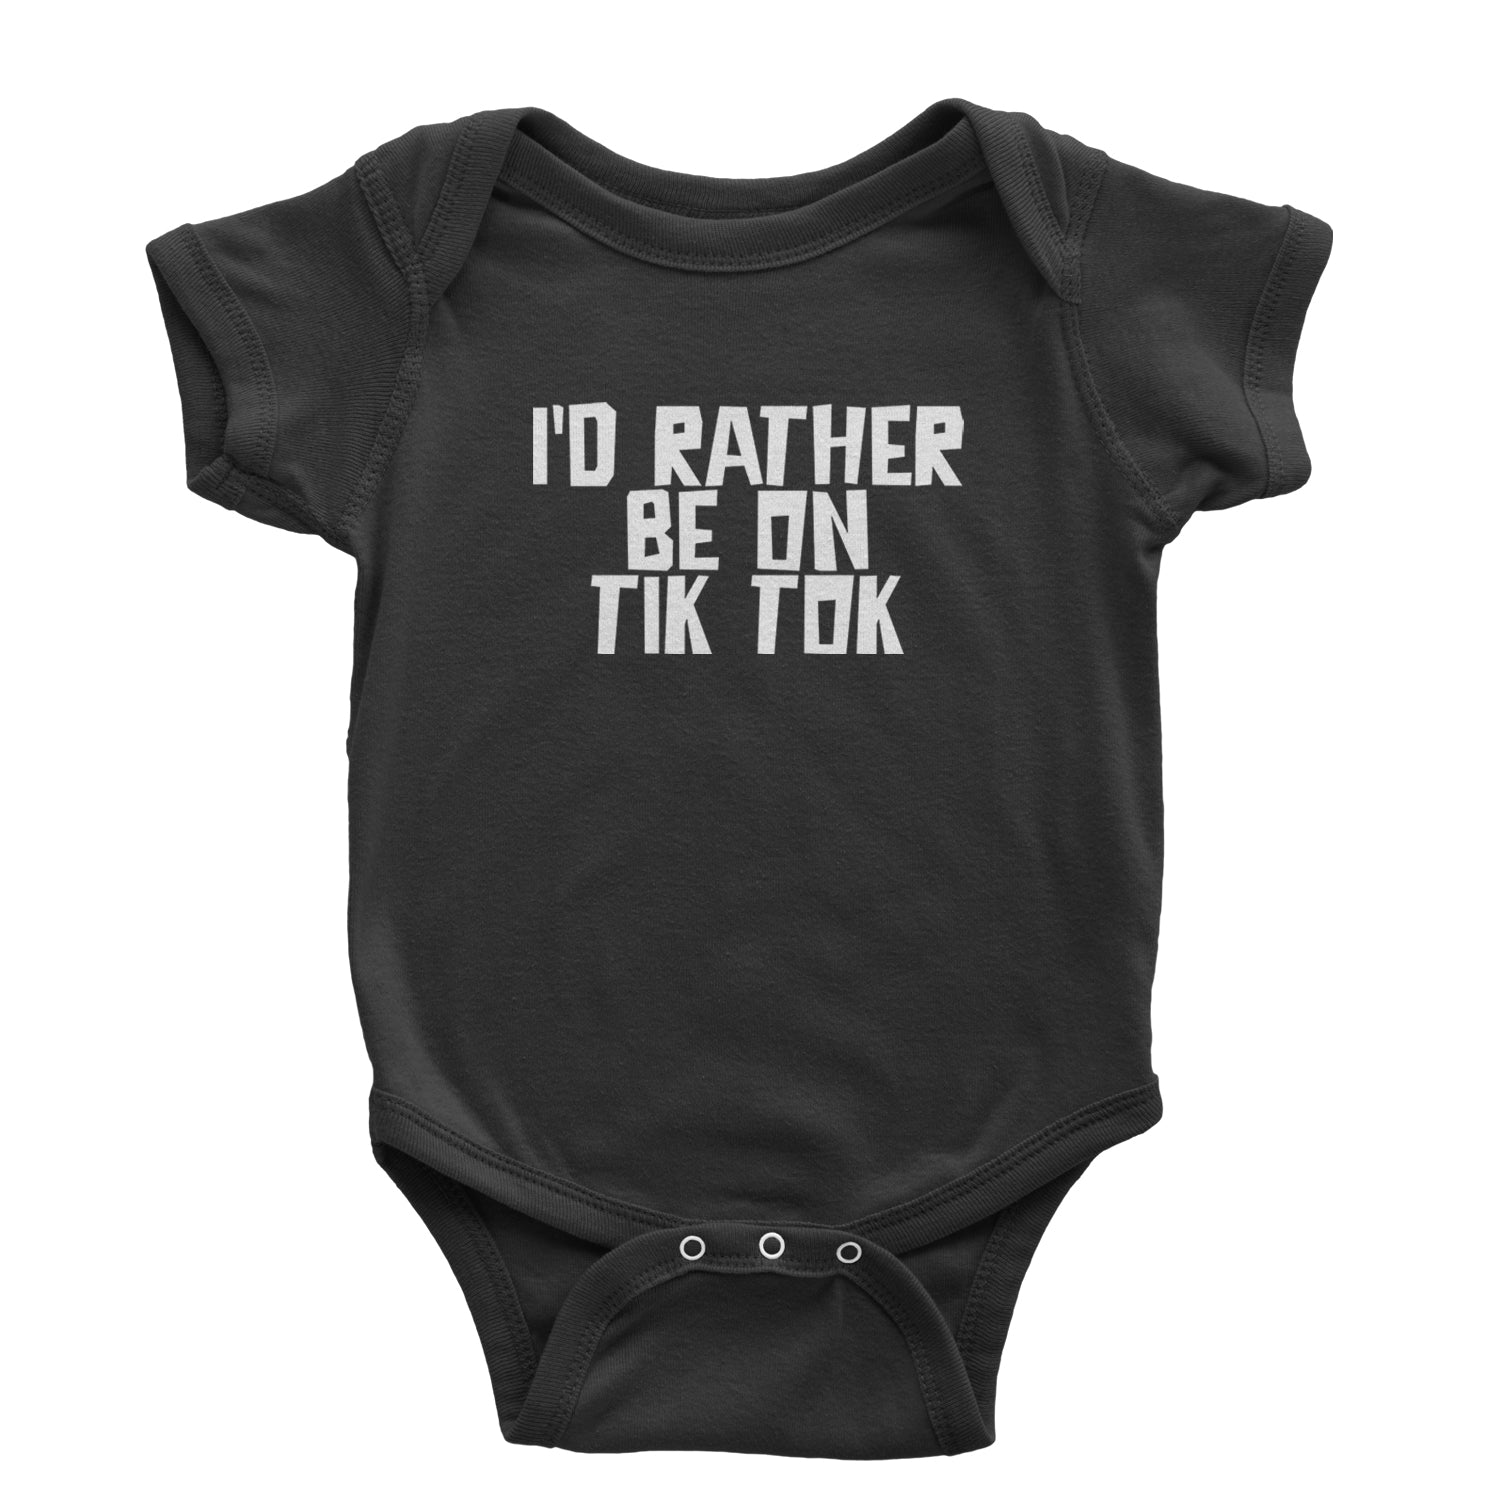 I'd Rather Be On TikTok Infant One-Piece Romper Bodysuit and Toddler T-shirt